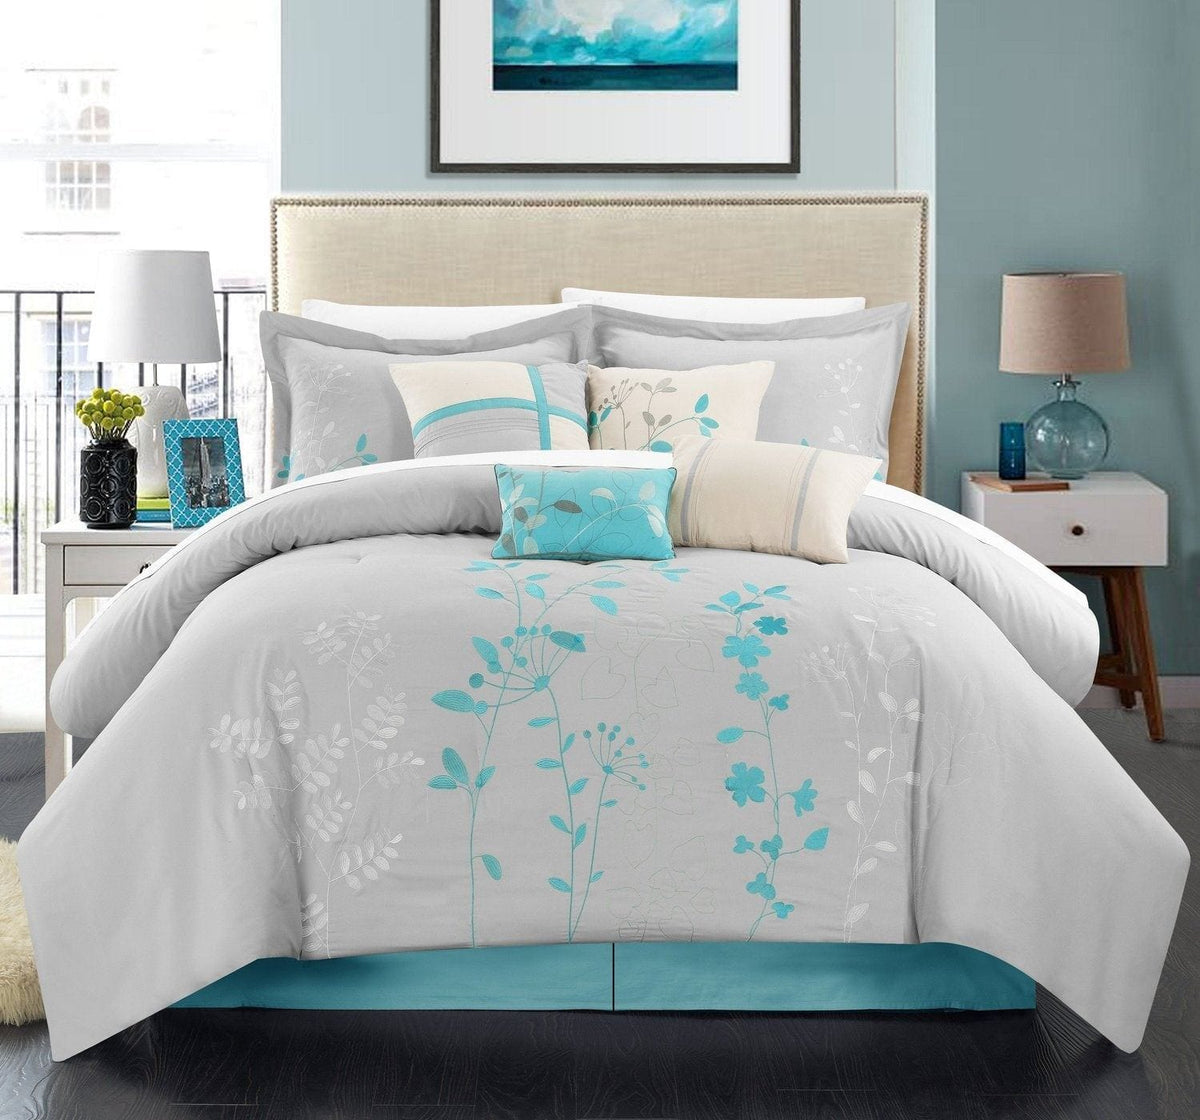 Chic Home Bliss Garden 8 Piece Floral Comforter Set Turquoise